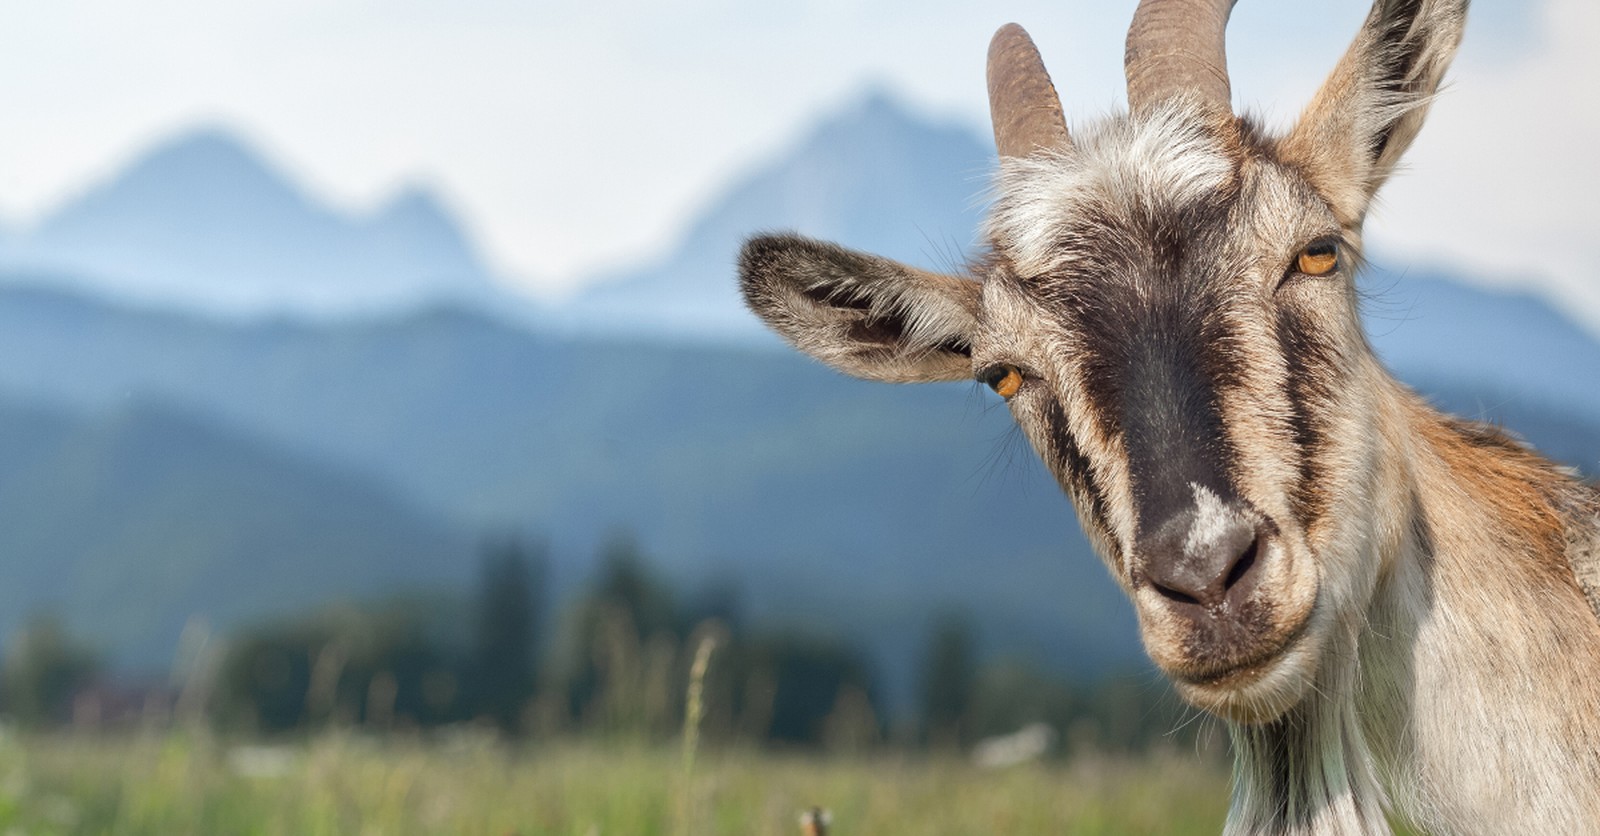 <b>5:</b> Why Is Satan Depicted as a Goat in Scripture?